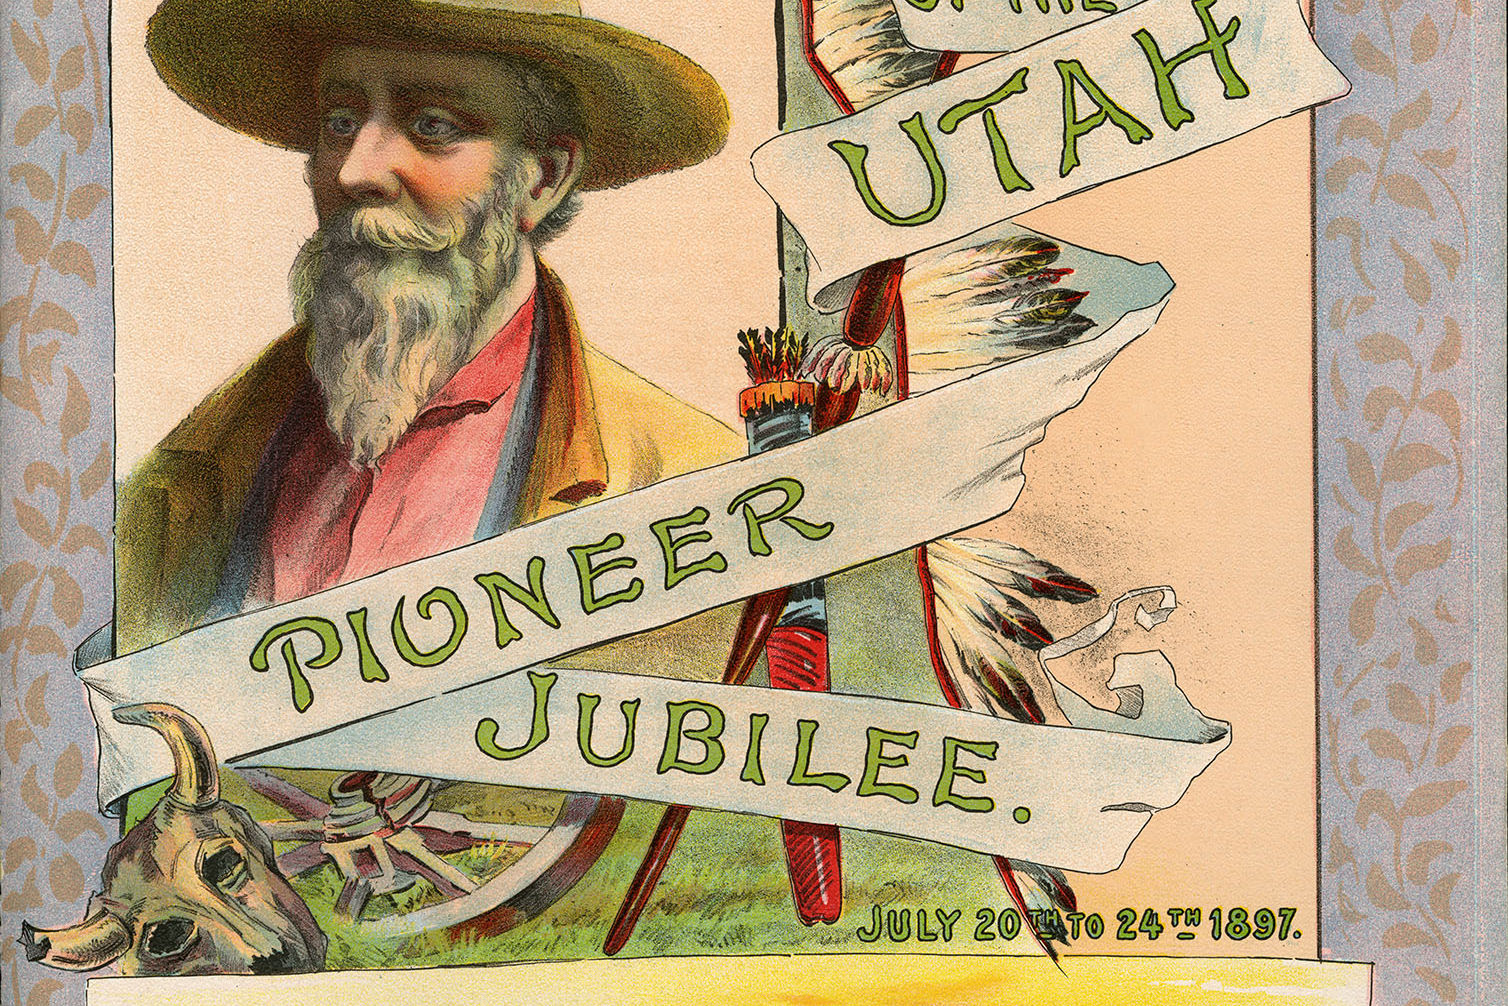 Pioneer Jubilee Exhibit Utah State Archives and Records Service | mnfolkarts